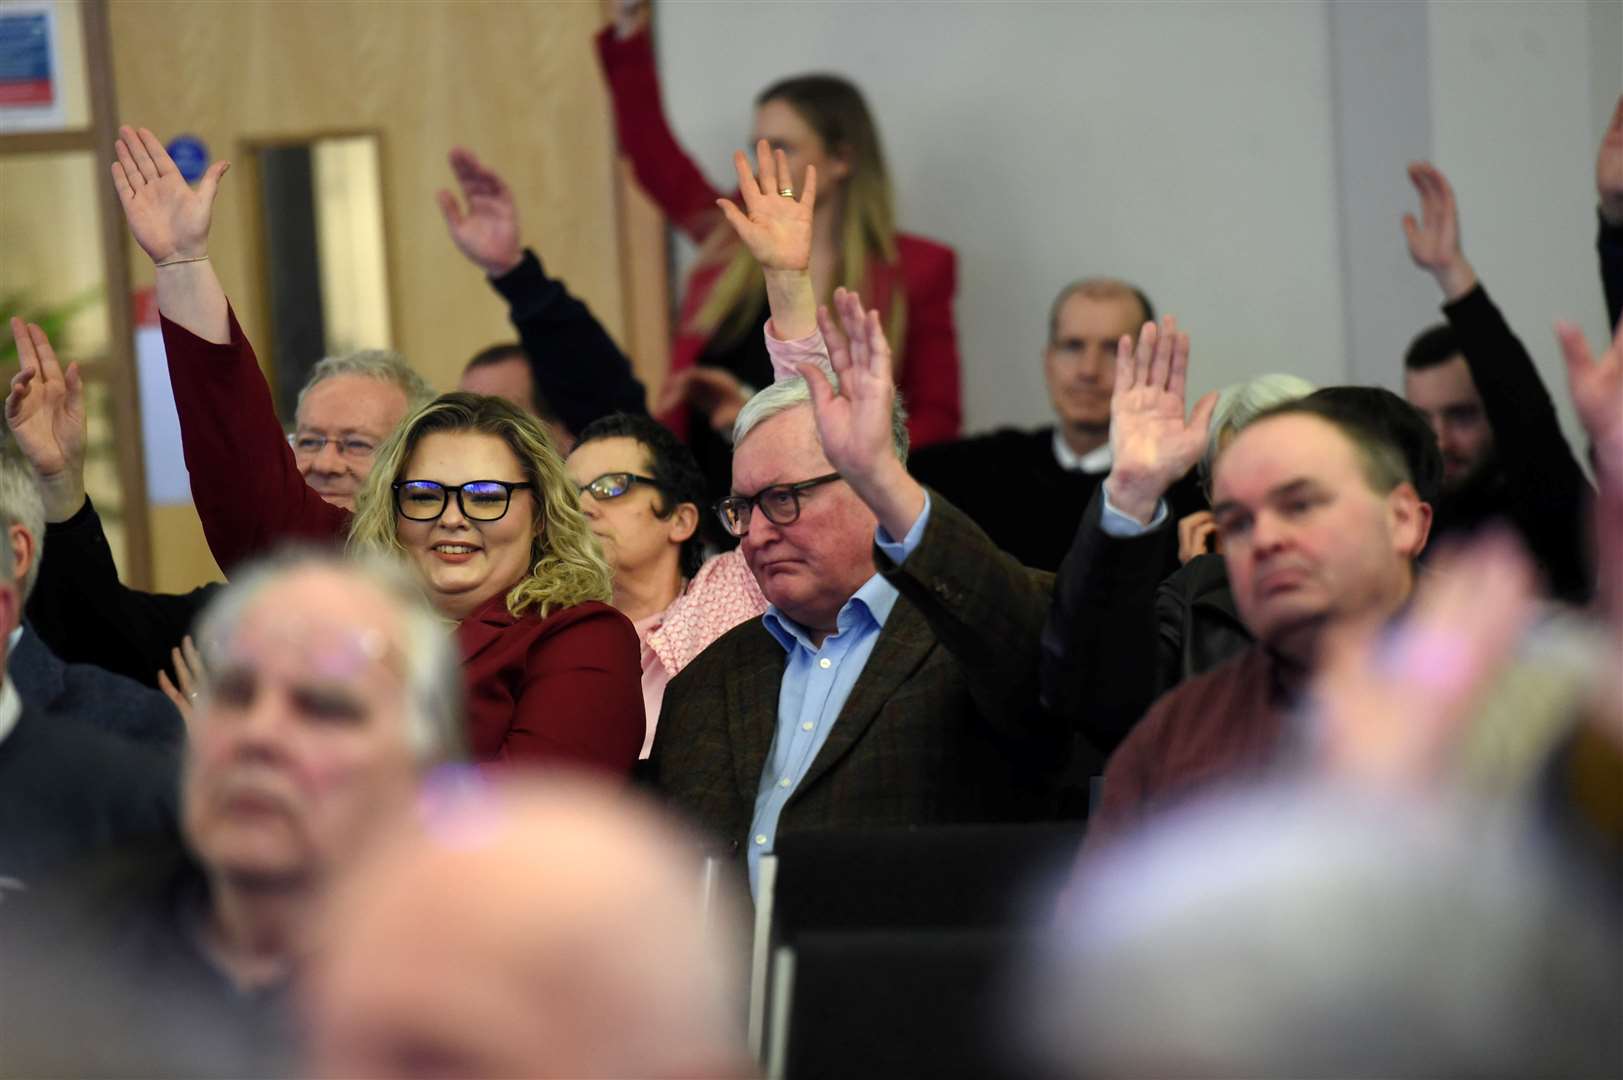 Fergus Ewing was among the audience members at the Inverness Courier Leadership Debate raising their hands when asked if they felt let down or angry about the failure to fulfil the A9 dualling pledge.